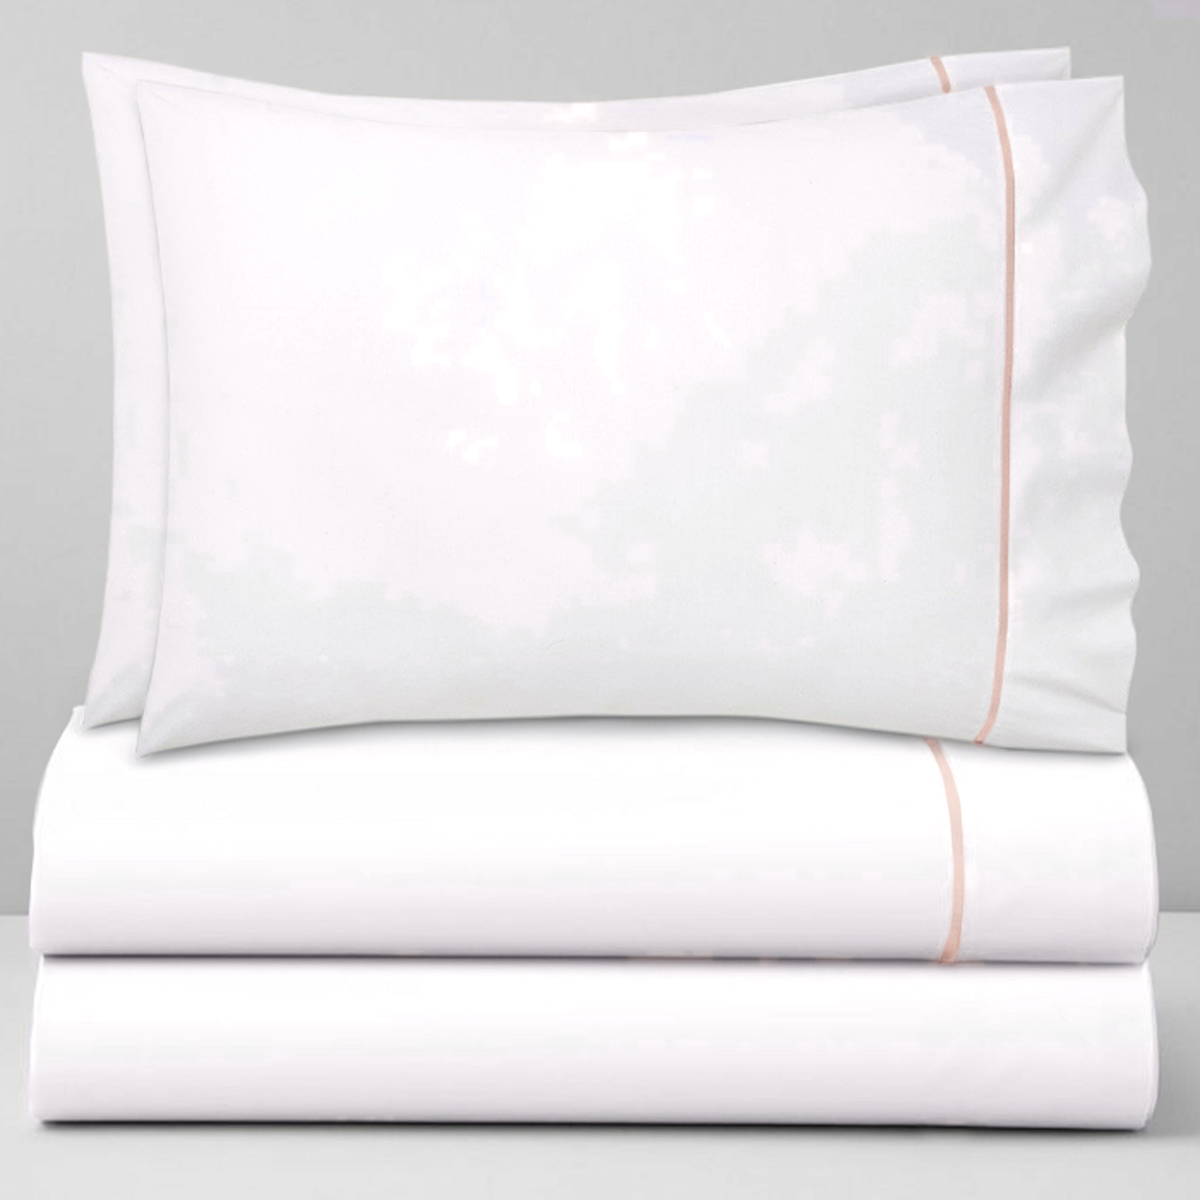 Sheet Set of Yves Delorme Athena Bedding in Poudre Color